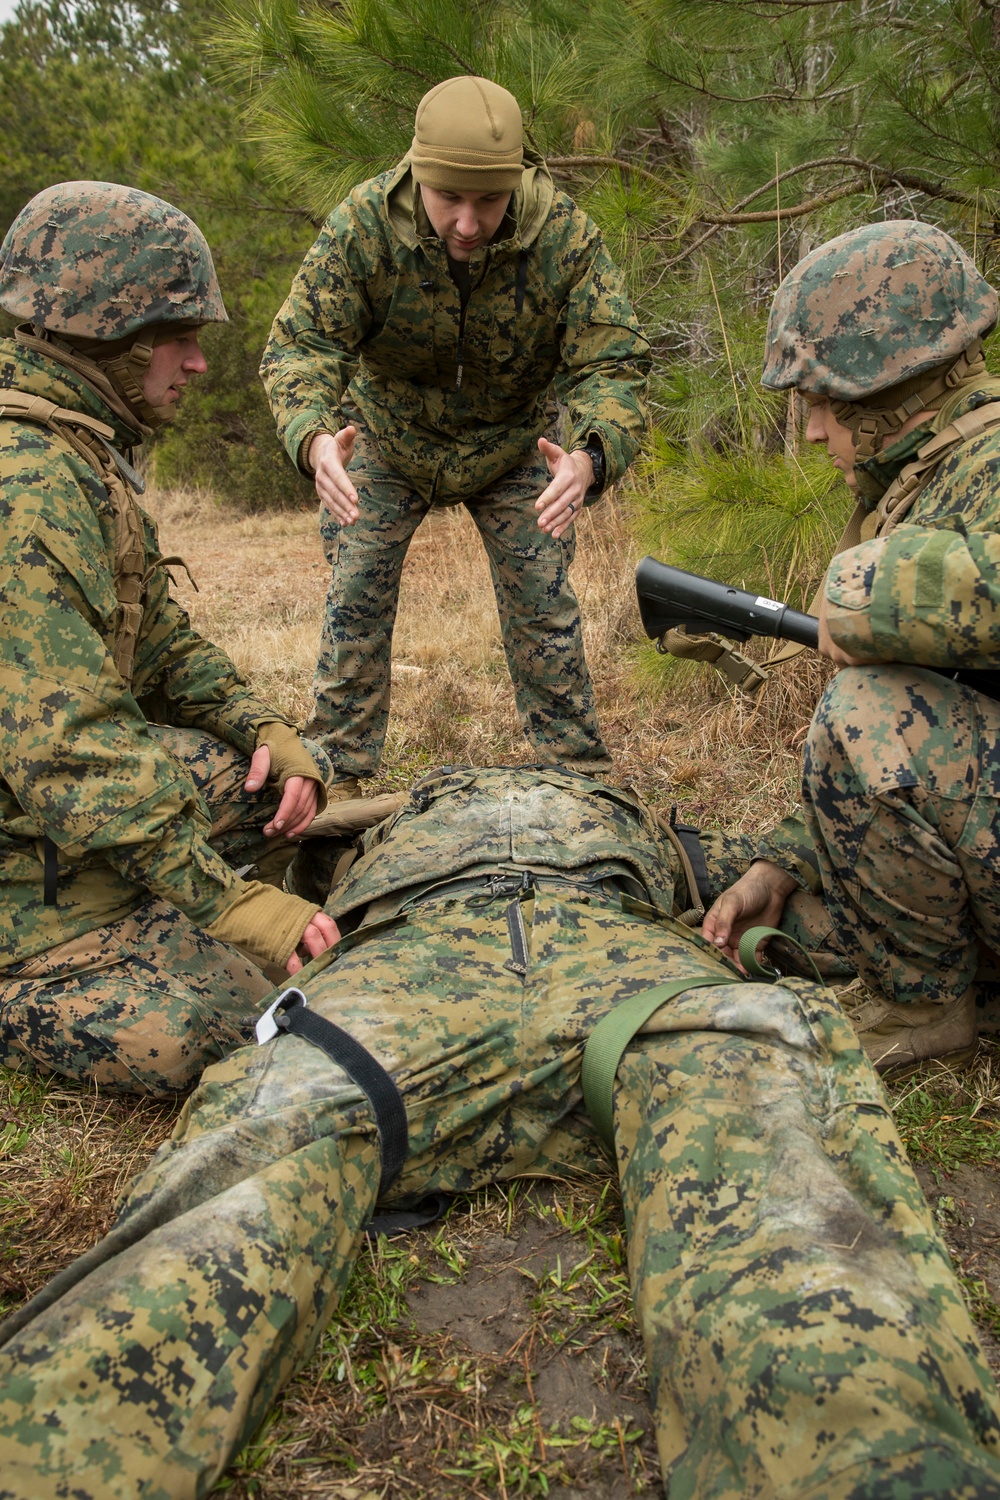 2nd Medical Battalion conducts casualty training